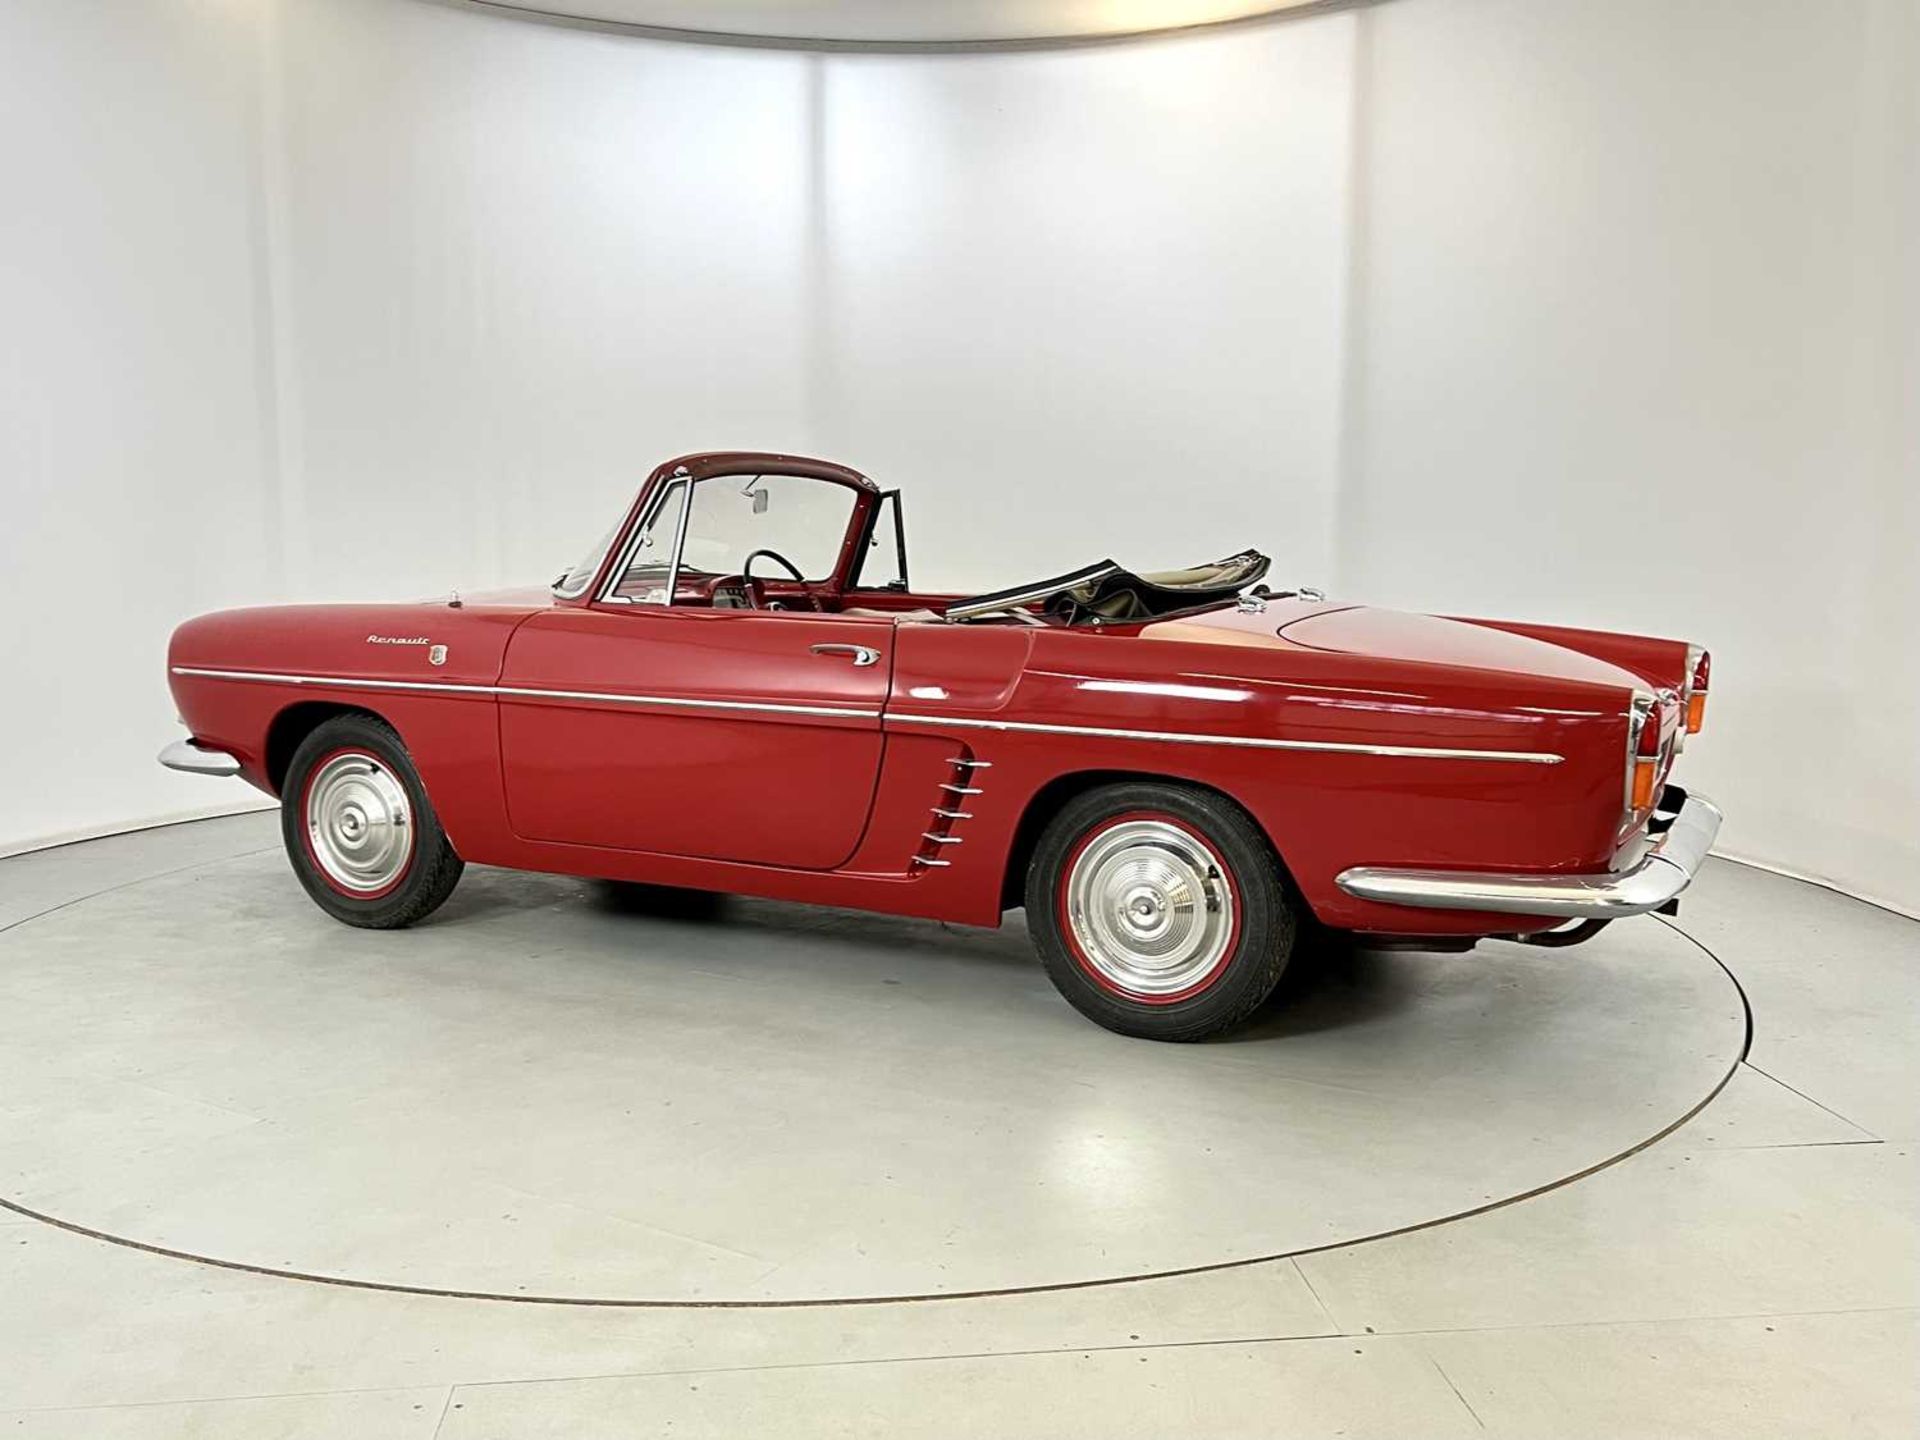 1962 Renault Floride Convertible - Image 19 of 43